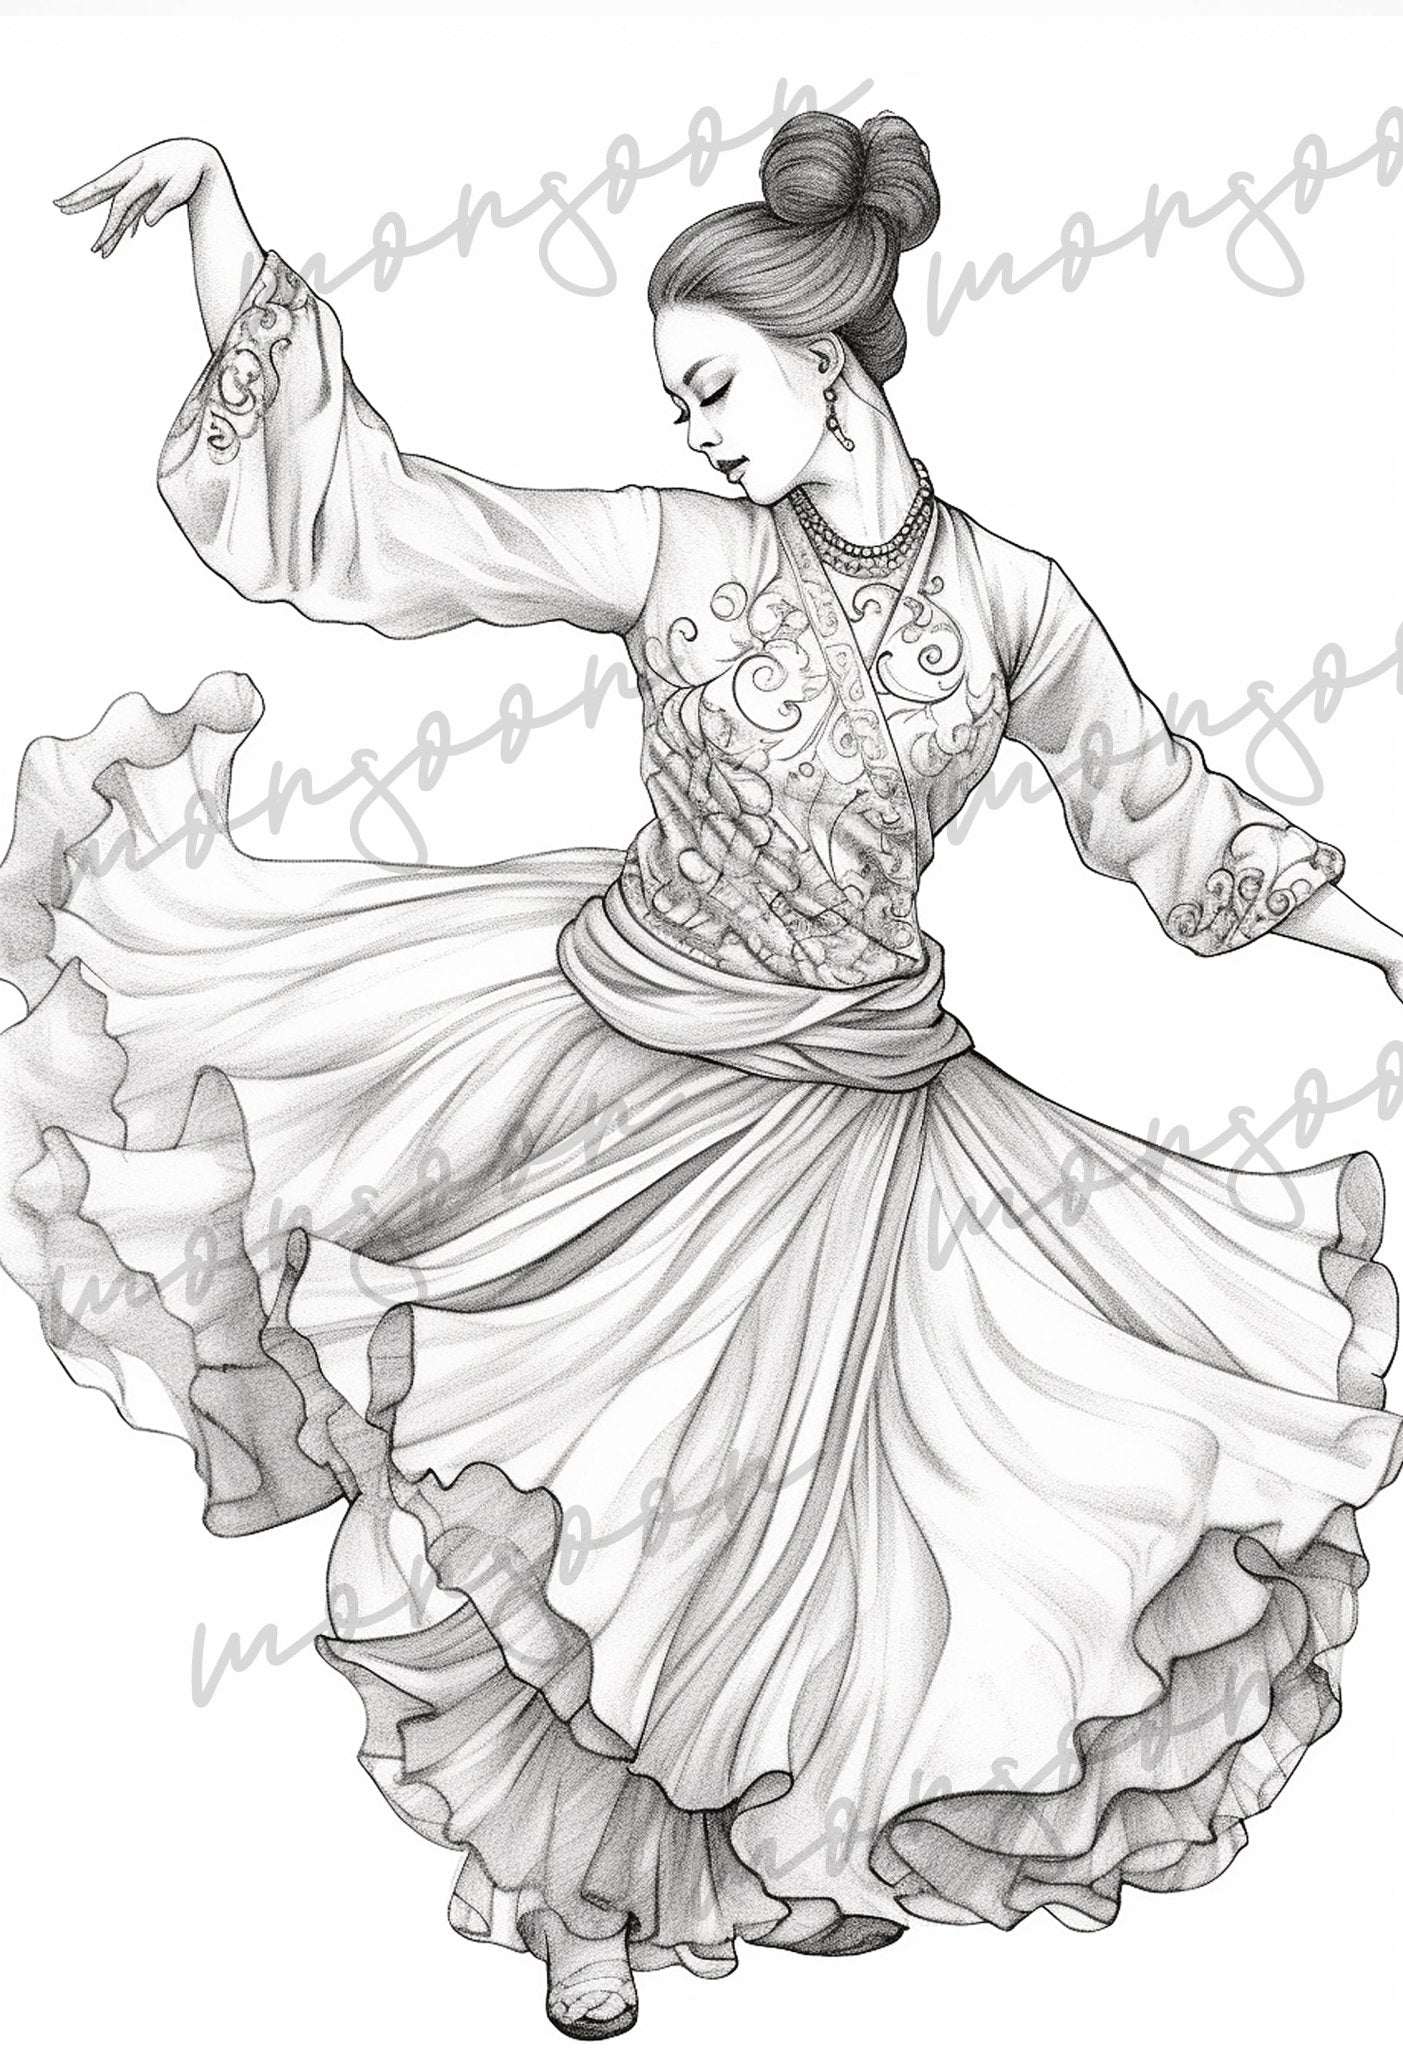 The World of Dancing Coloring Book (Printbook) - Monsoon Publishing USA